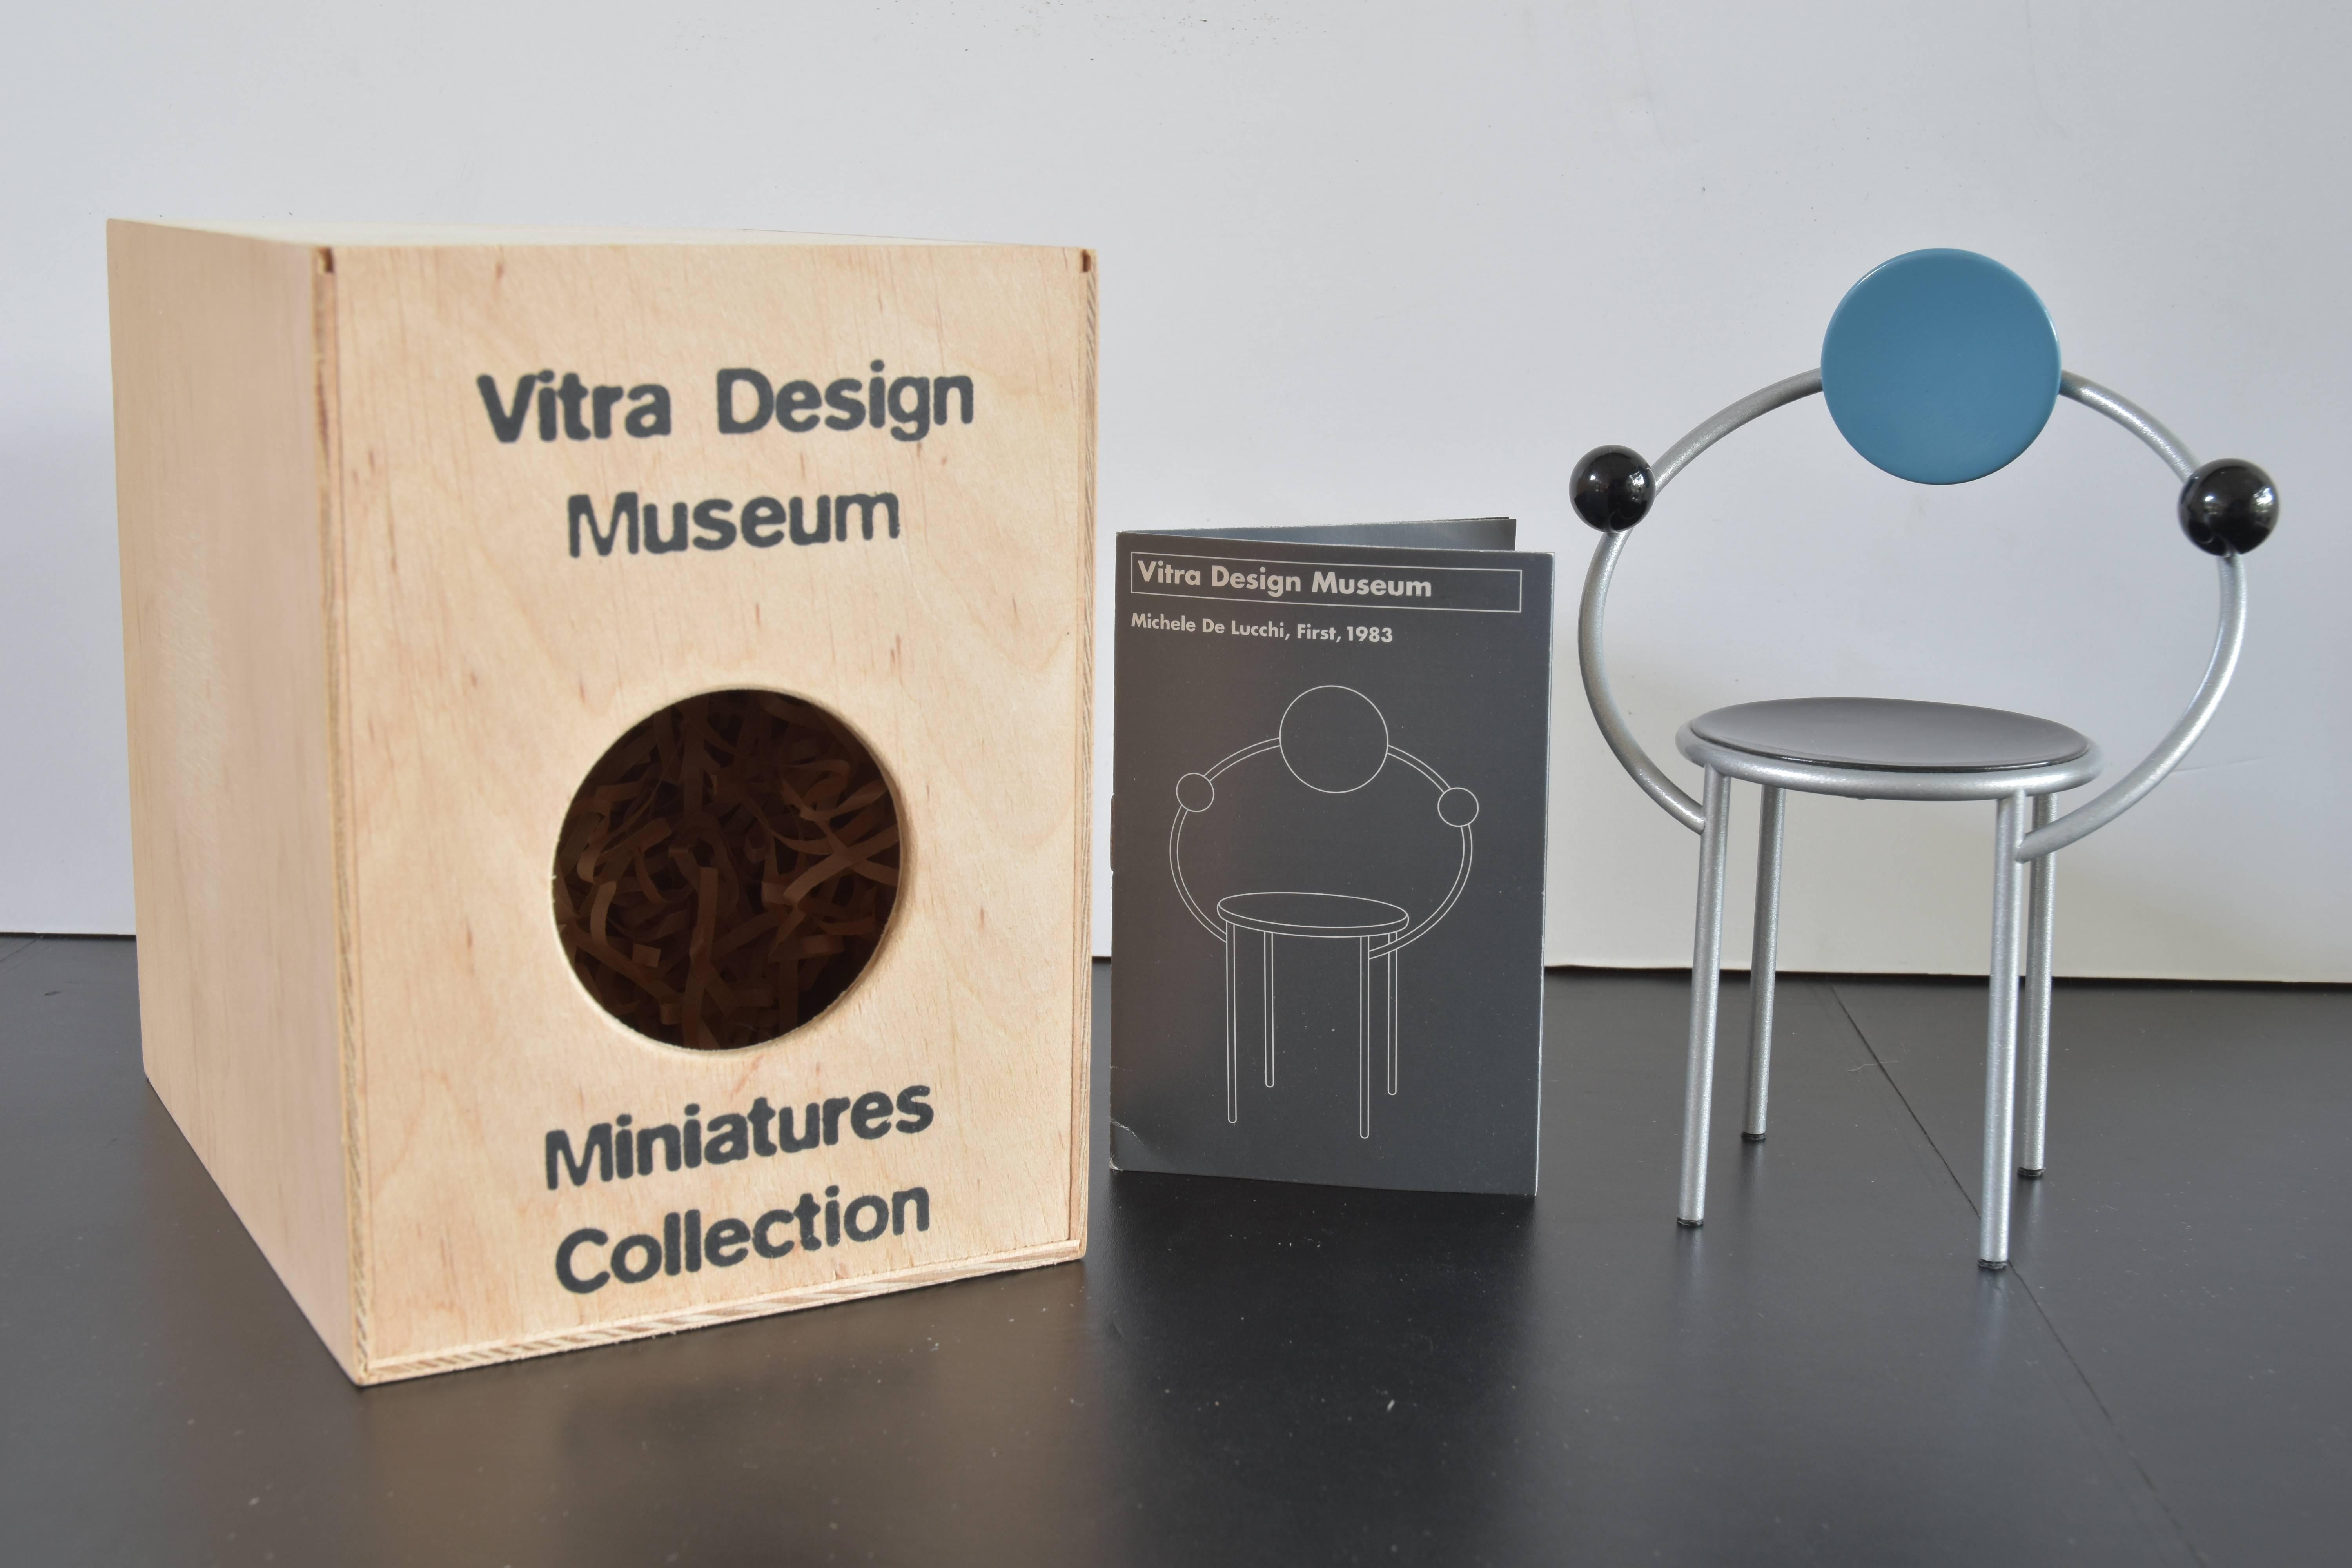 From the Vitra Design Museum collection of miniature models, a Michele De Lucchi, First Model chair originally produced in 1983.

Included are the miniature model and historical narrative of the maker and the piece.